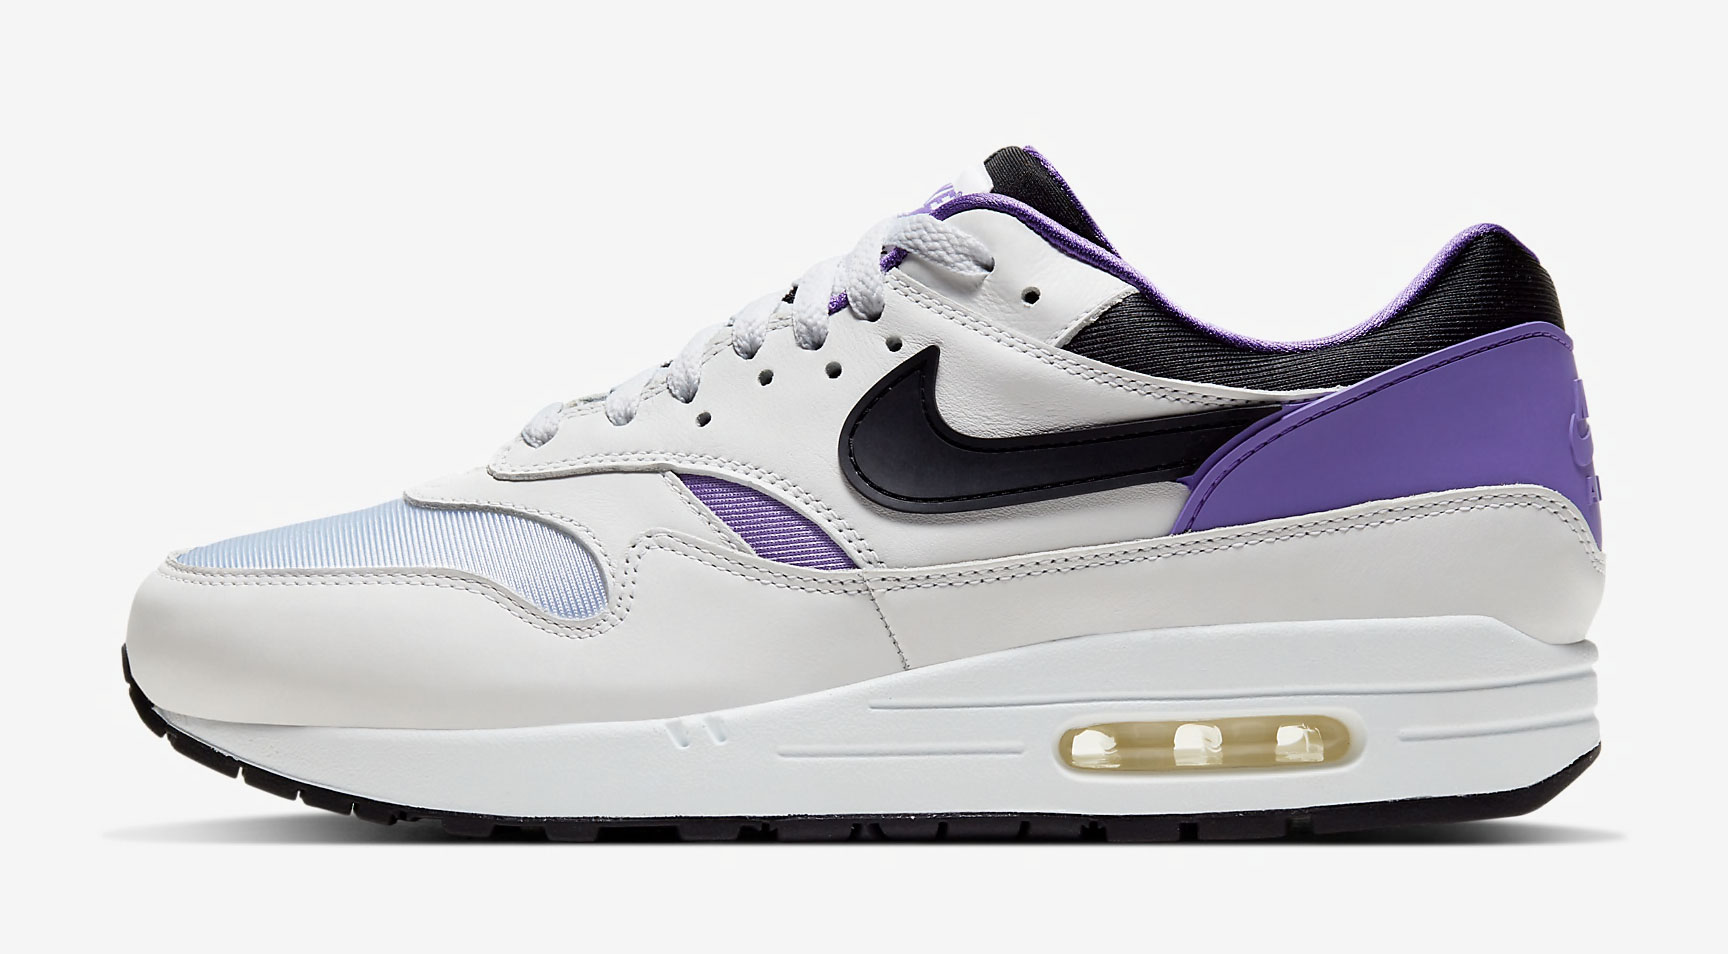 nike-air-max-1-dna-chapter-1-huarache-purple-punch-release-date